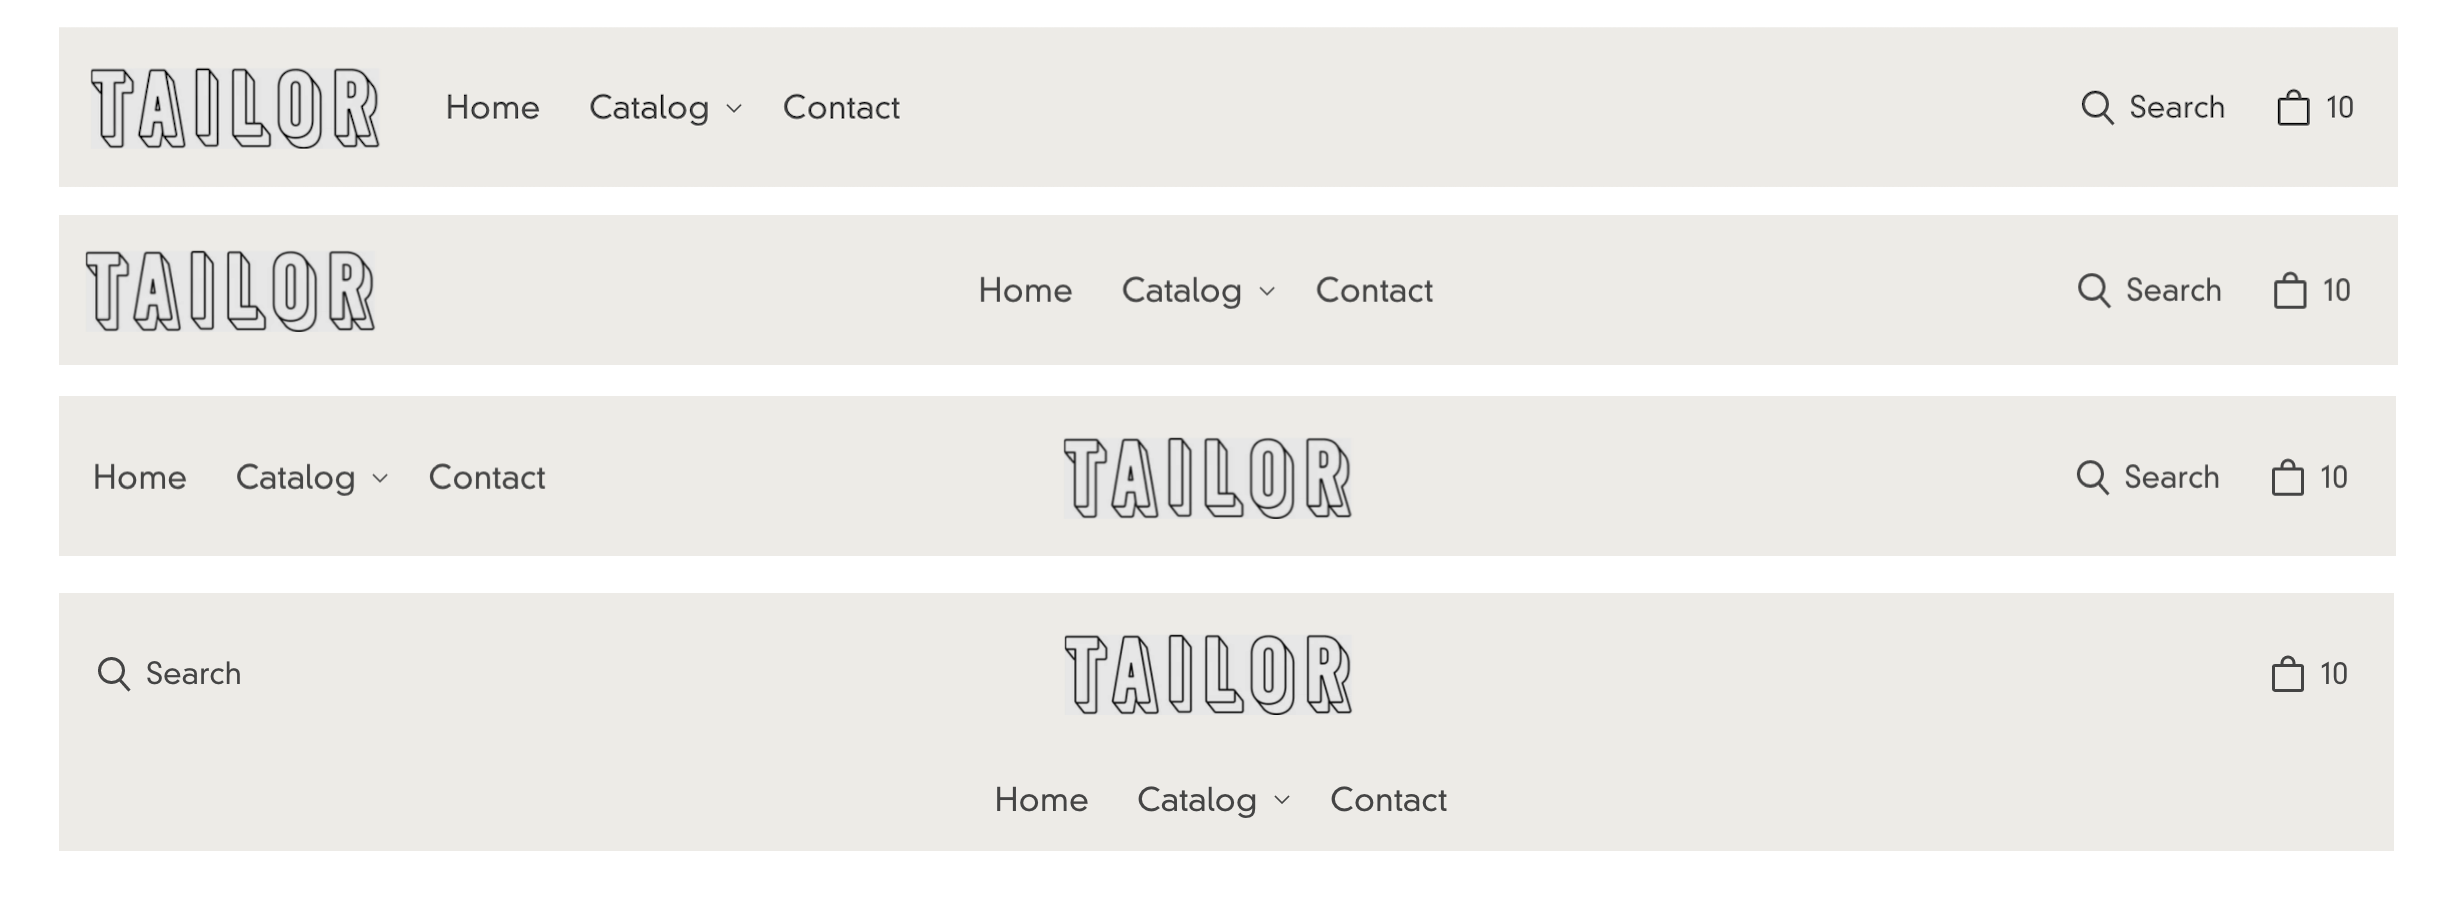 four options for tailor header layout of menu and logo.png